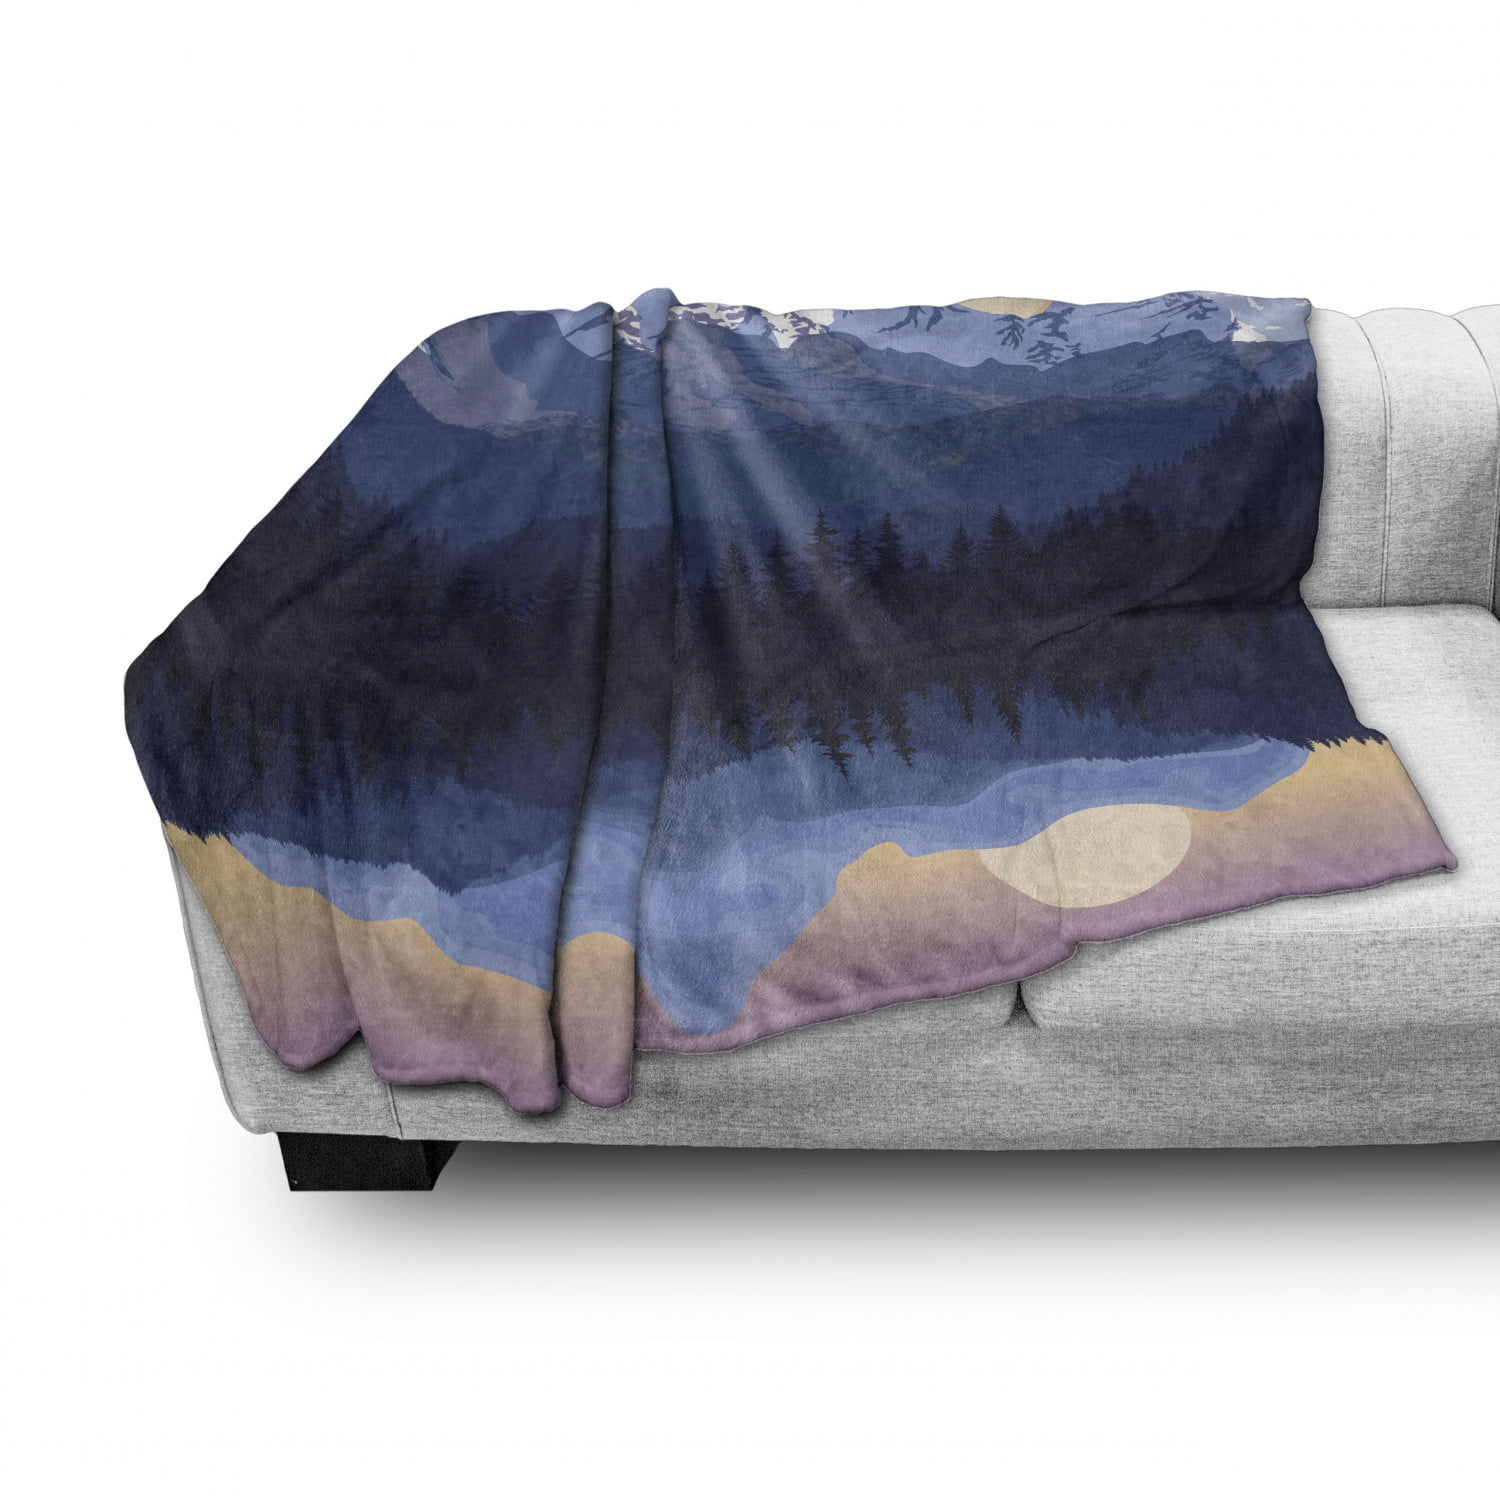 Liana Cave and Sea View Sunset Scene Early Morning in The Wild Ambesonne Dreamy Jungle Soft Flannel Fleece Throw Blanket Cozy Plush for Indoor and Outdoor Use 60 x 80 Pale Green Charcoal Grey 